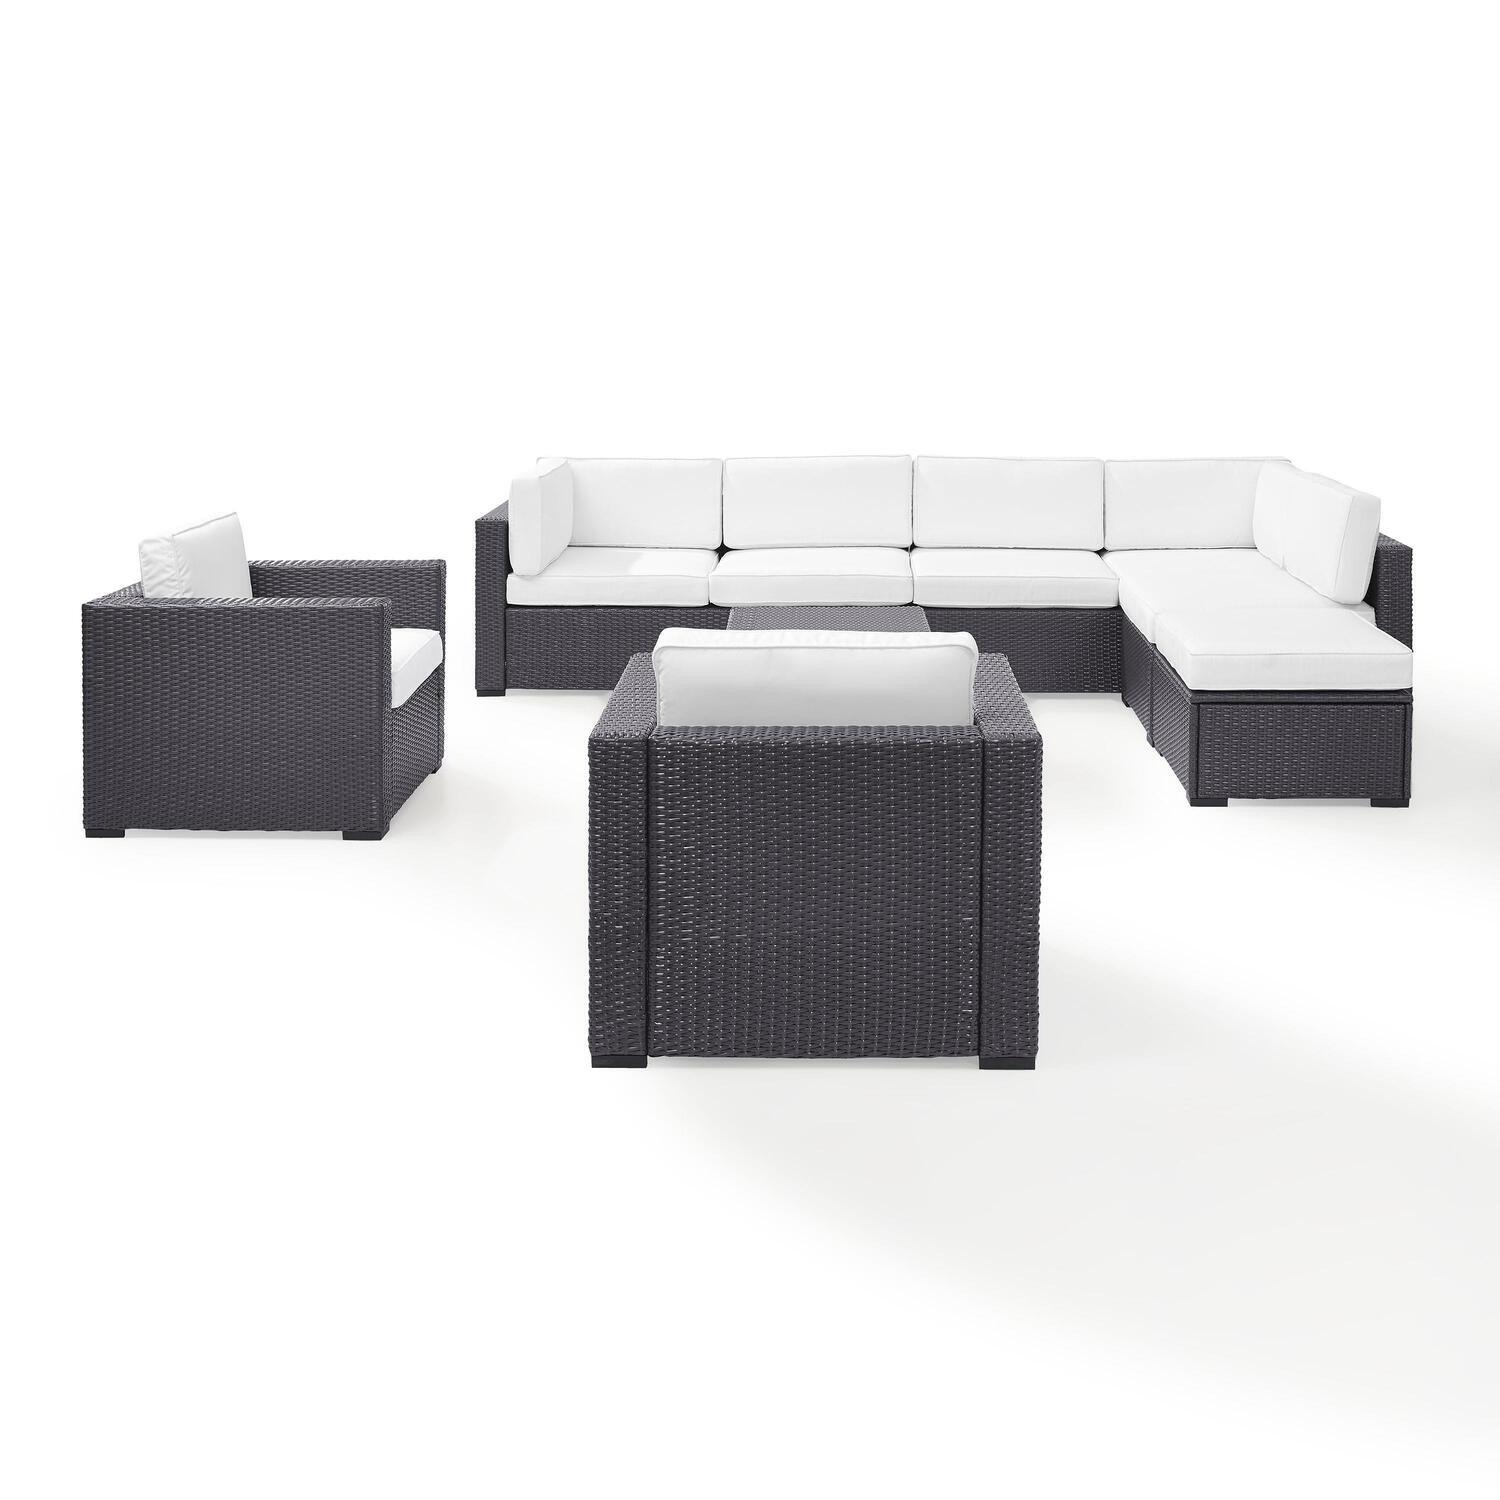 Crosley  Biscayne 7 Piece Outdoor Wicker Seating Set - White - image 1 of 4